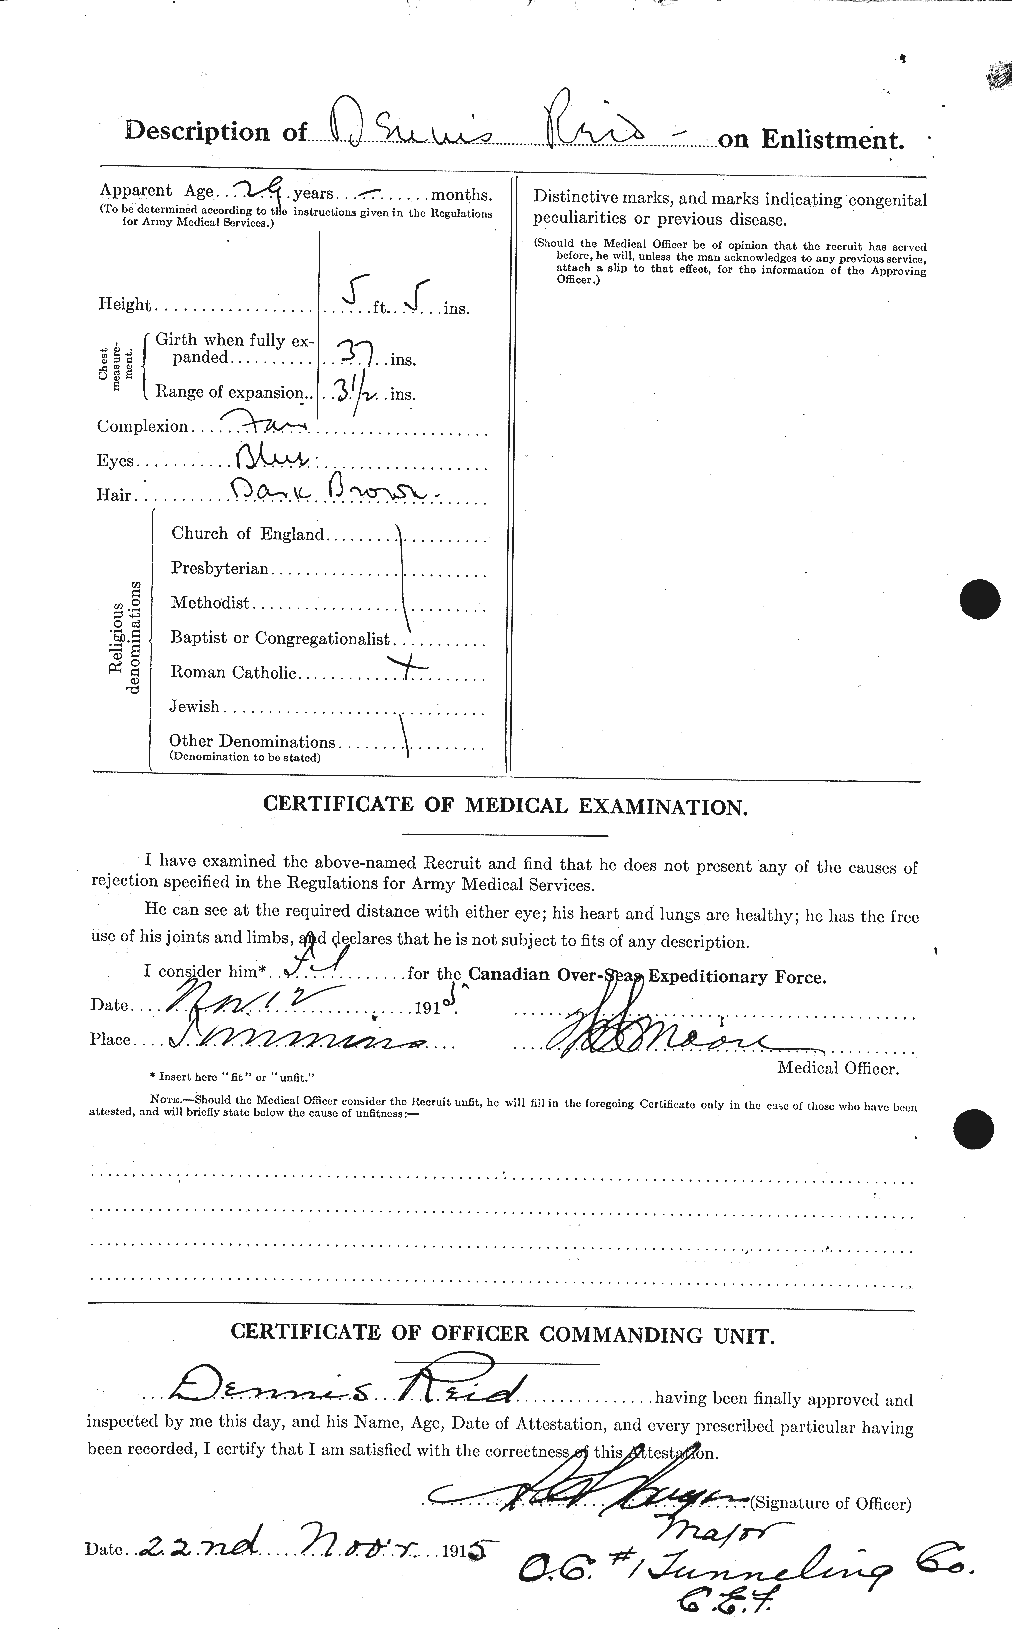 Personnel Records of the First World War - CEF 597952b